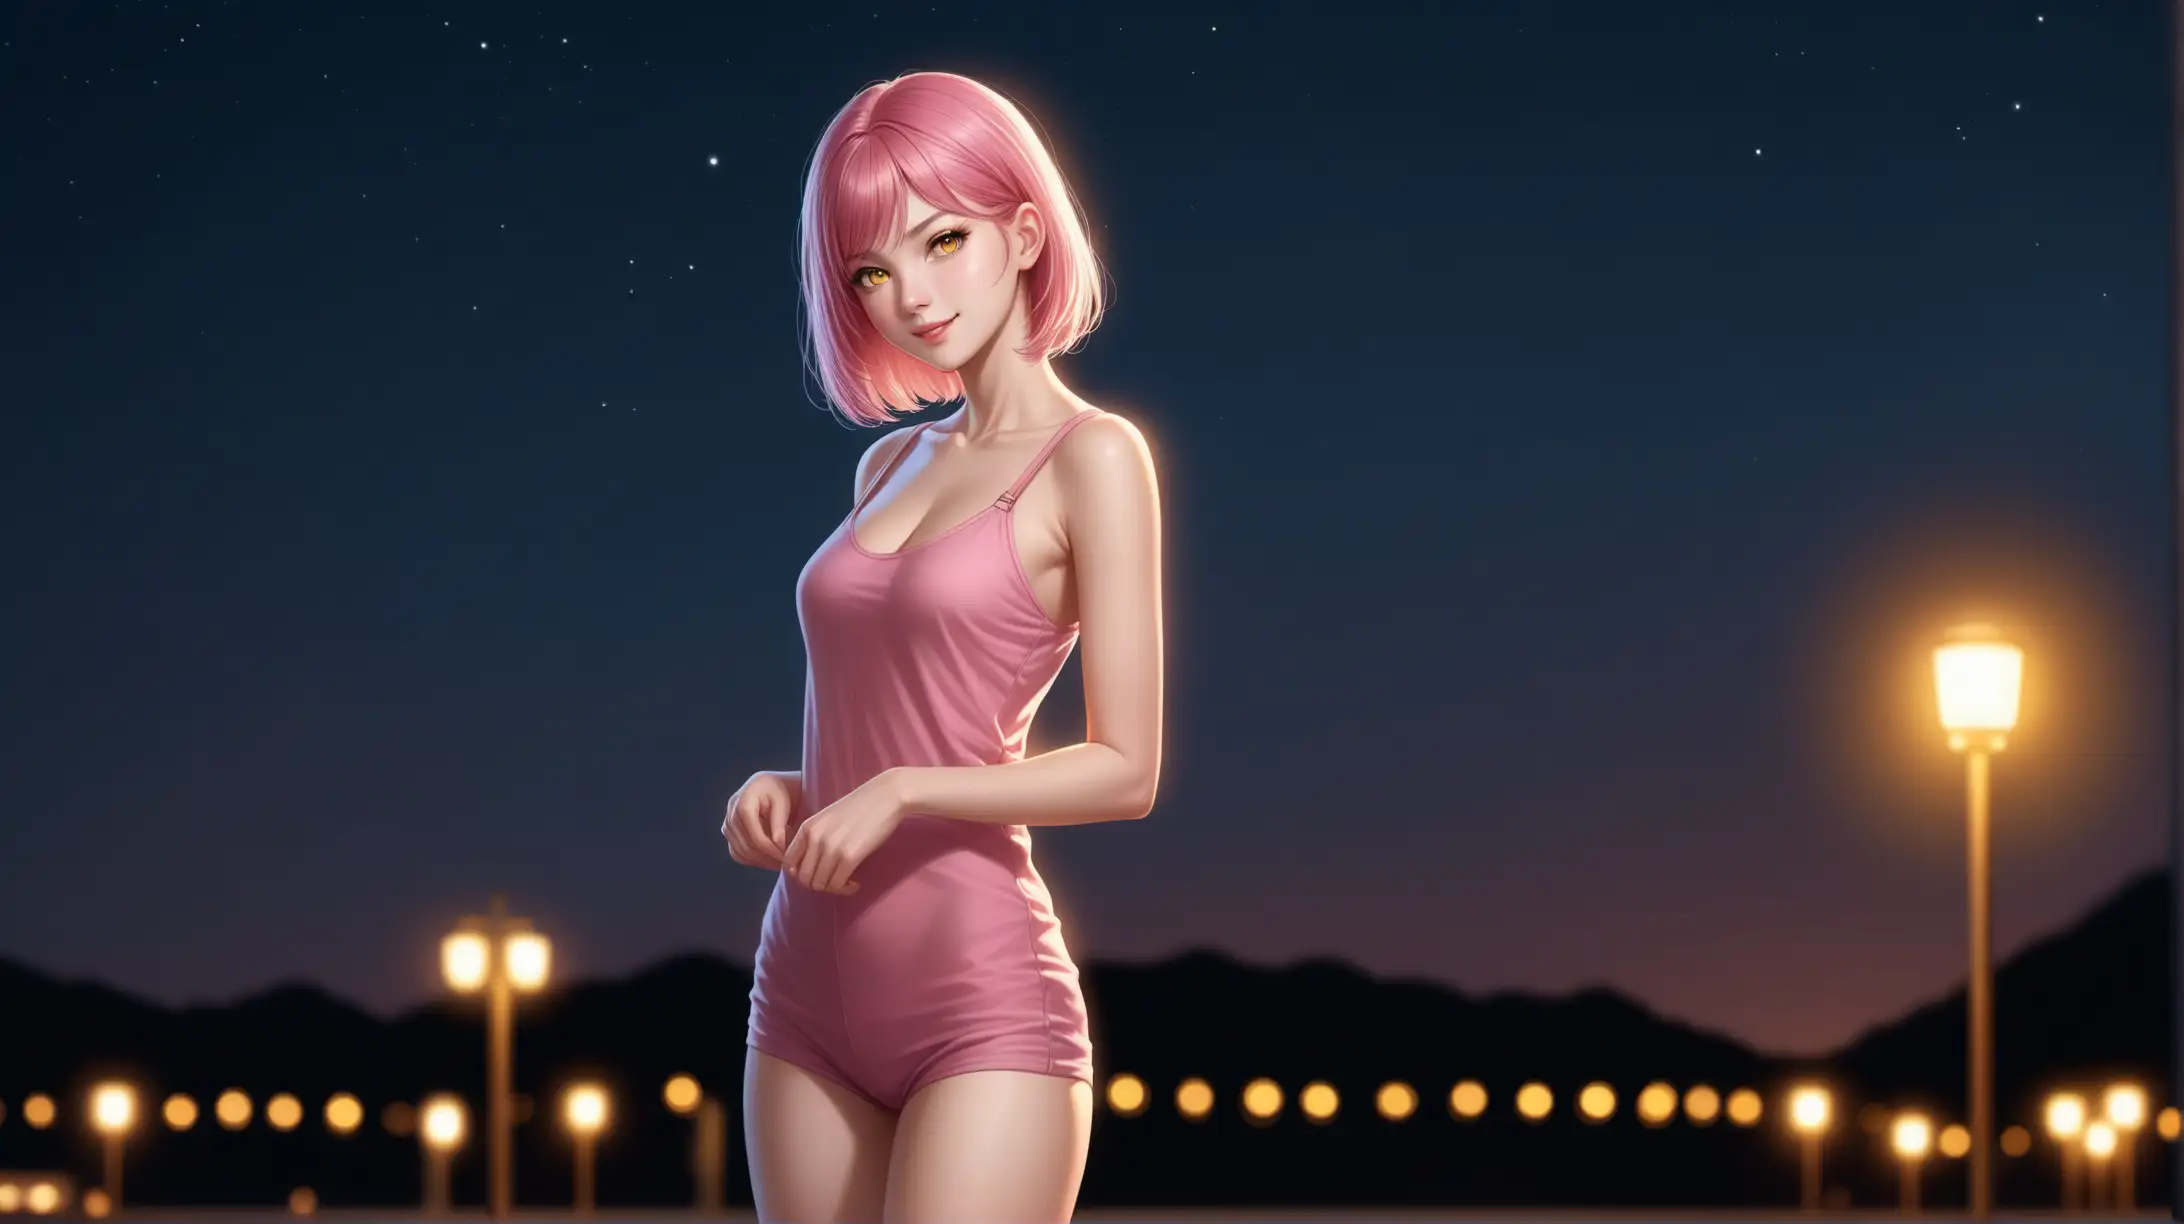 Draw a woman, short pink hair, yellow ringed eyes, slender figure, high quality, realistic, accurate, detailed, long shot, outdoors, night lighting, casual outfit, seductive pose, smiling toward viewer